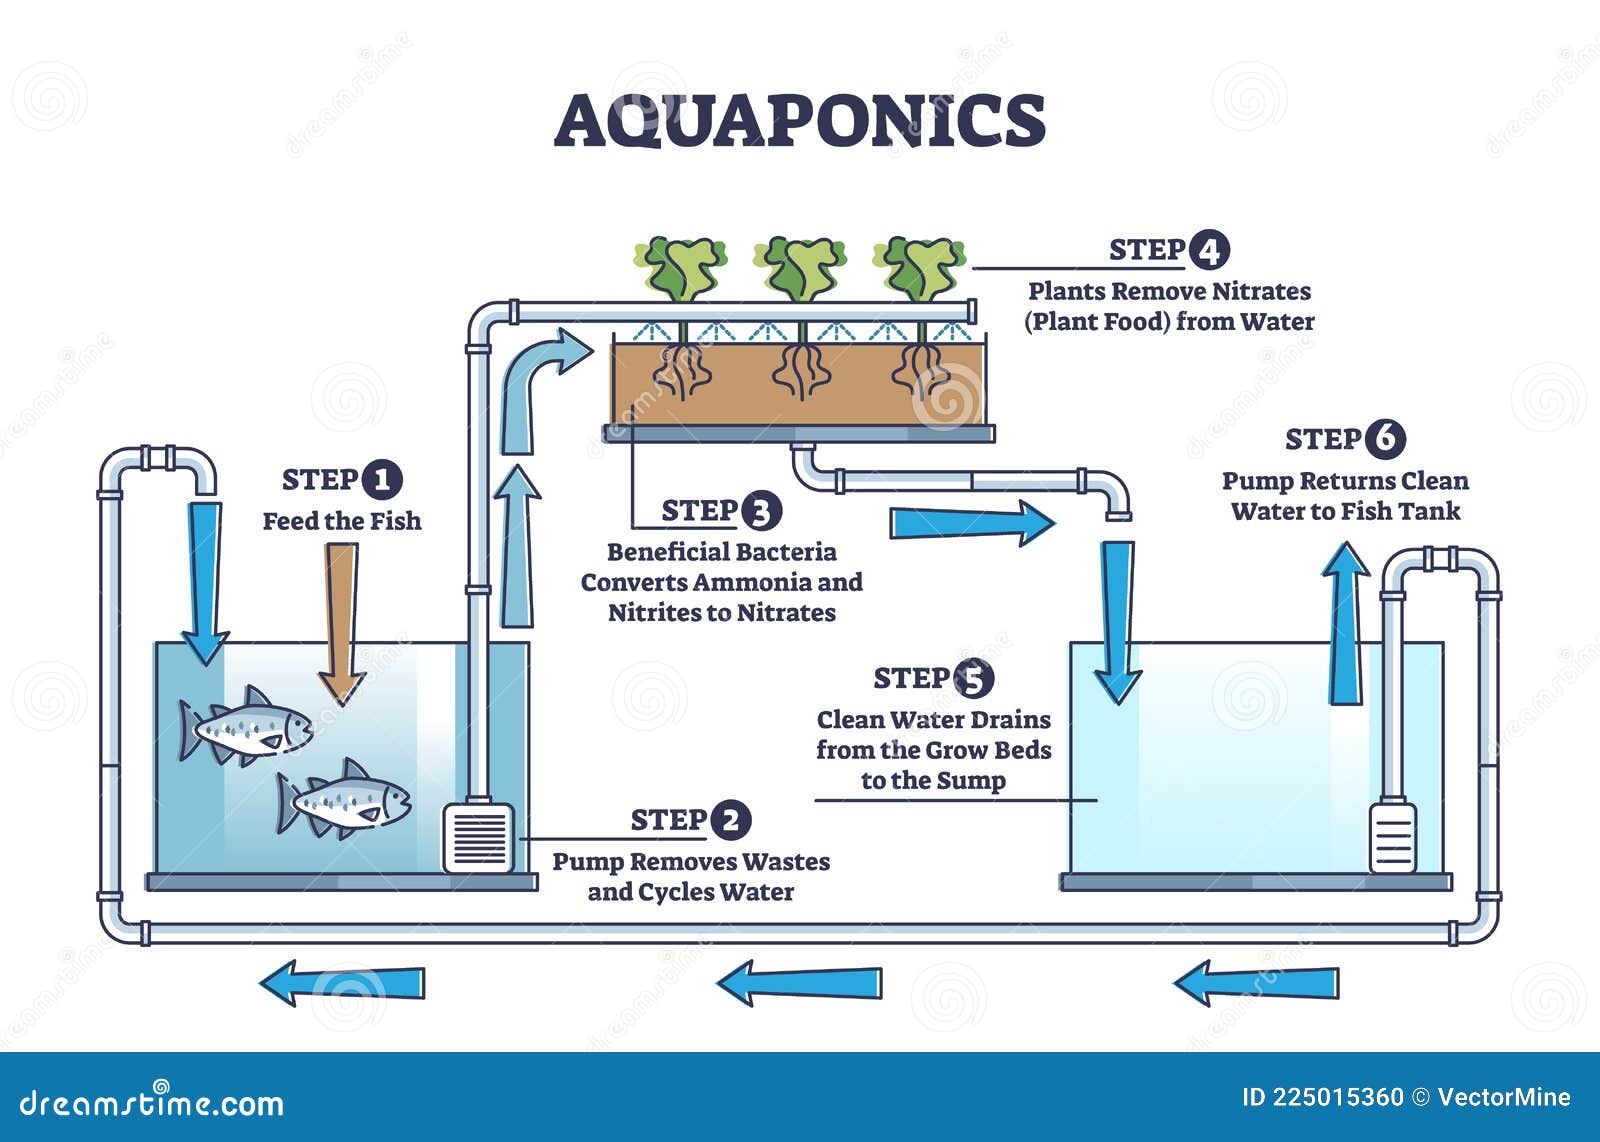 aquaponics food production with hydroponics plants and fishes outline diagram